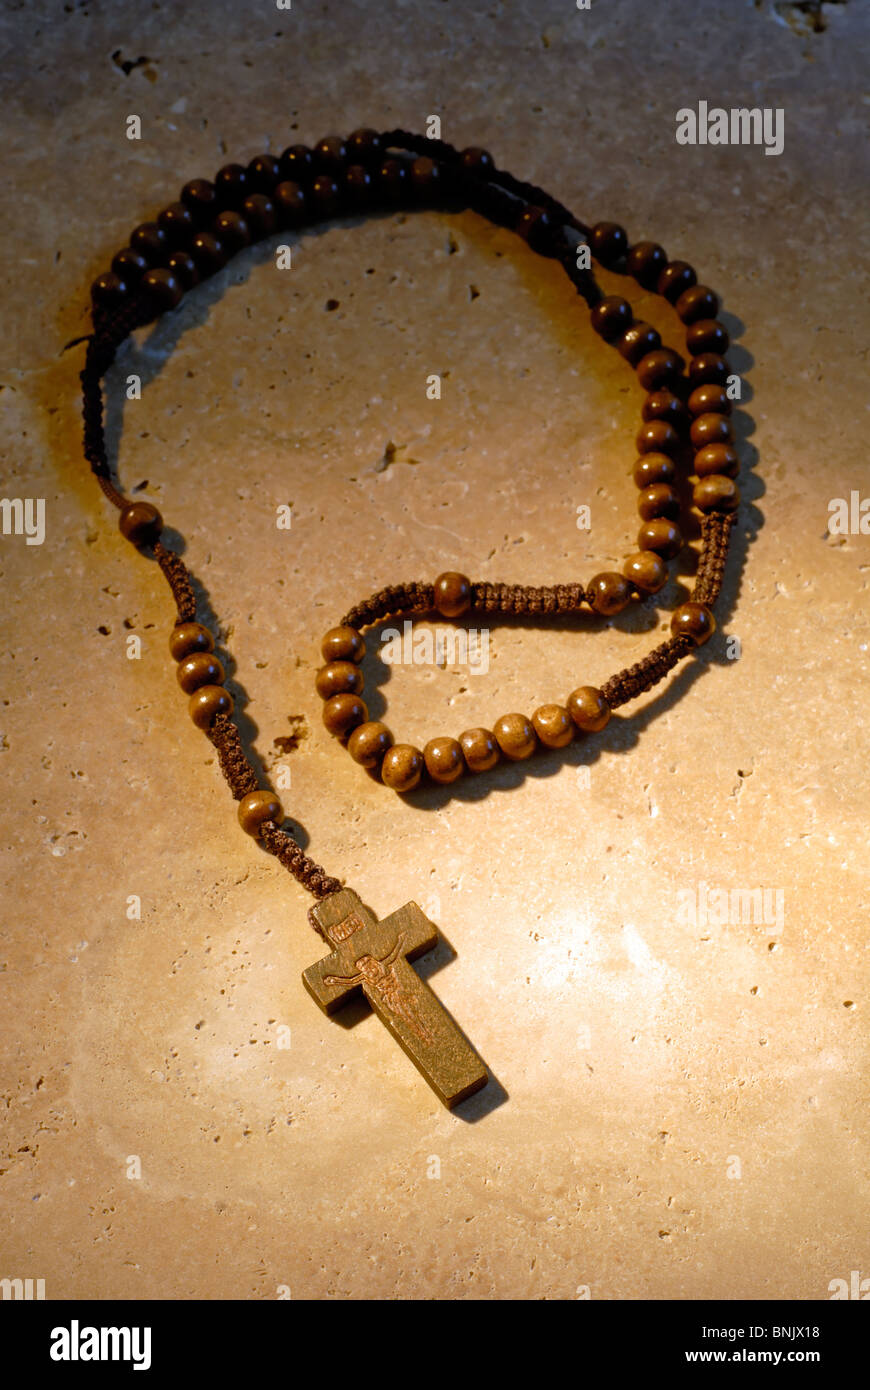 Wooden Rosaries Beads On A Stone Background In The Afternoon Sun Stock Photo